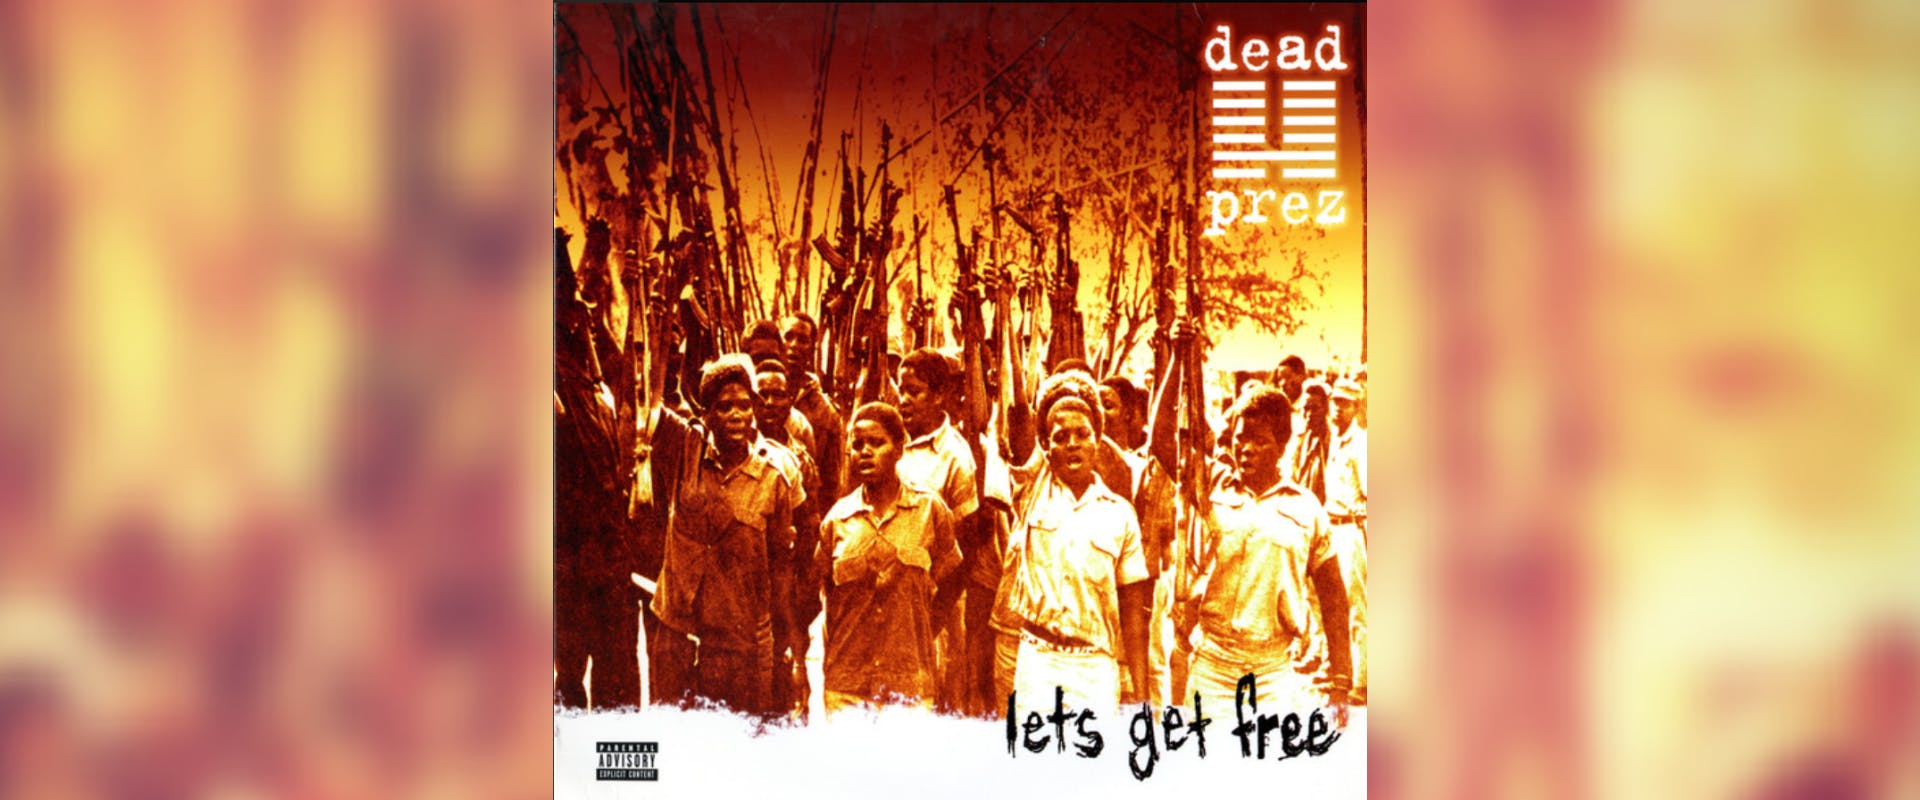 Dead Prez 2 CD LOT Lets Get Free, RBG New poster included Restored 2 like  new